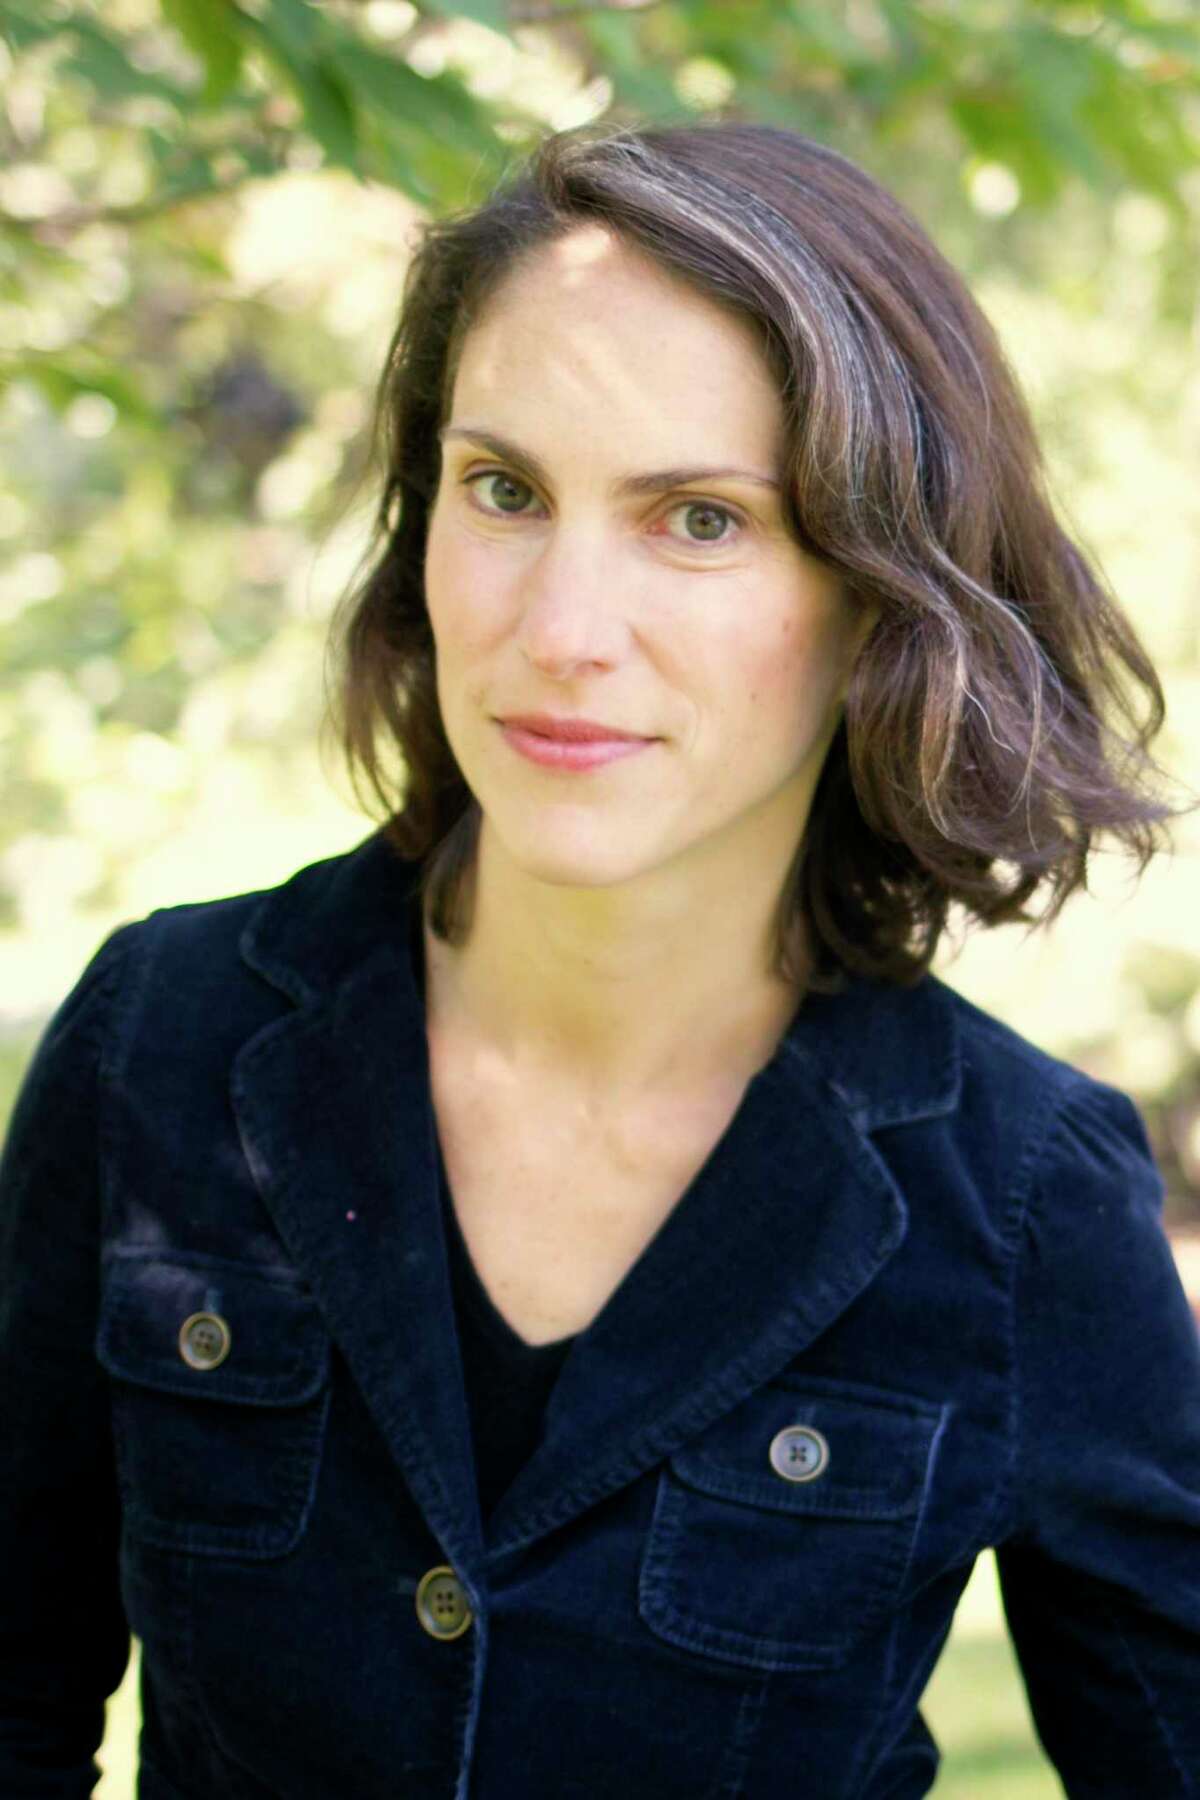 Author Lauren Acampora will discuss her novel, "The Paper Wasp," at the New Canaan Library on Wednesday, Sept. 11, at 6:30 p.m. The talk was rescheduled from July.